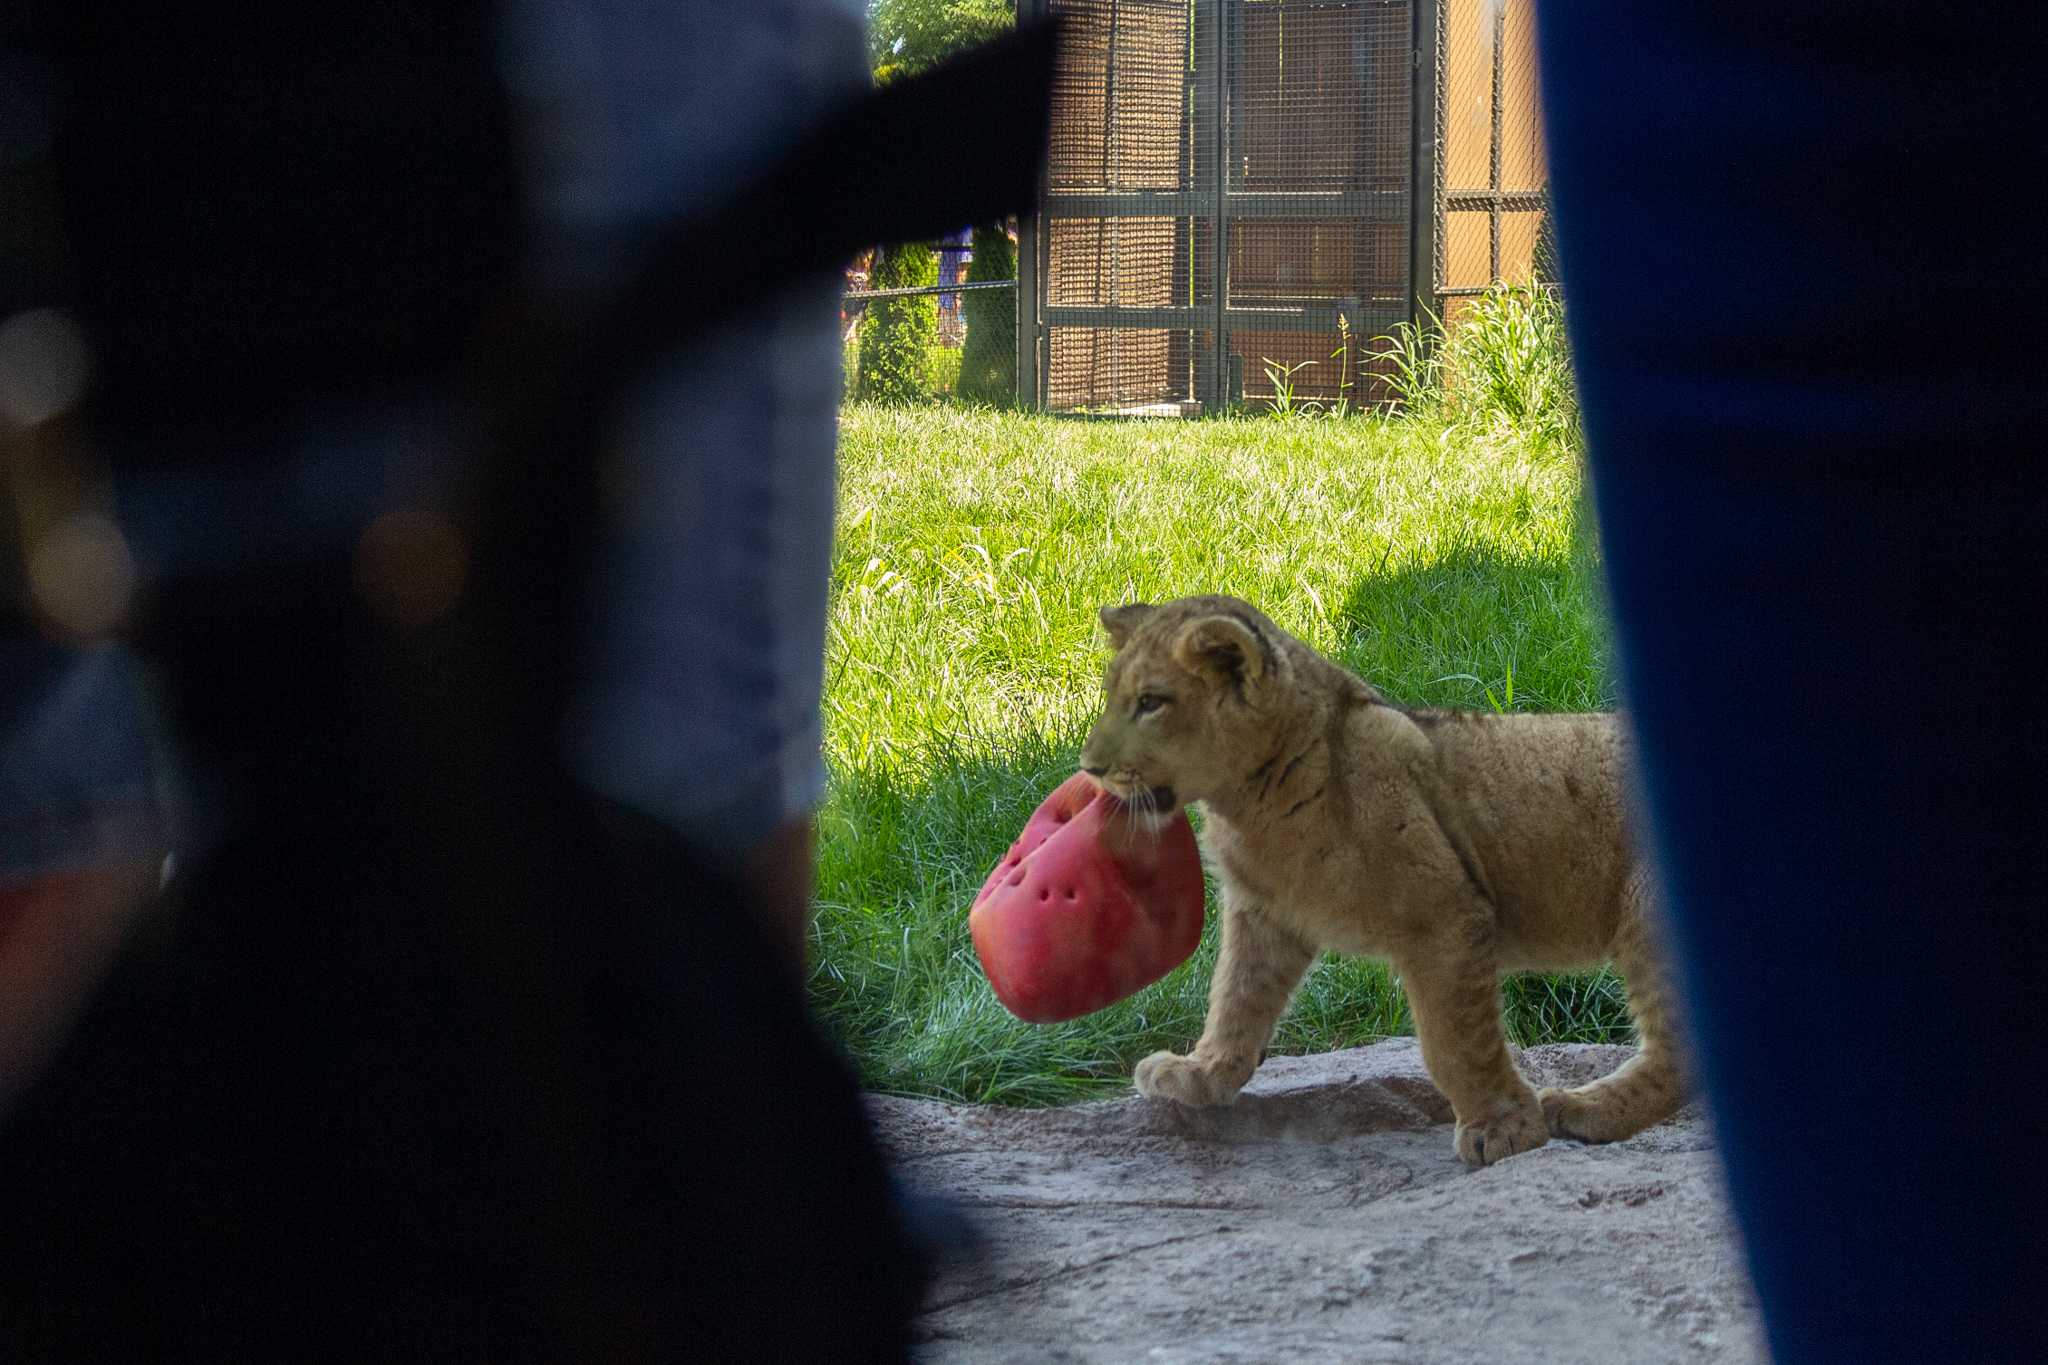 Side view of a lion cub holding a battered red ball in its small jaws